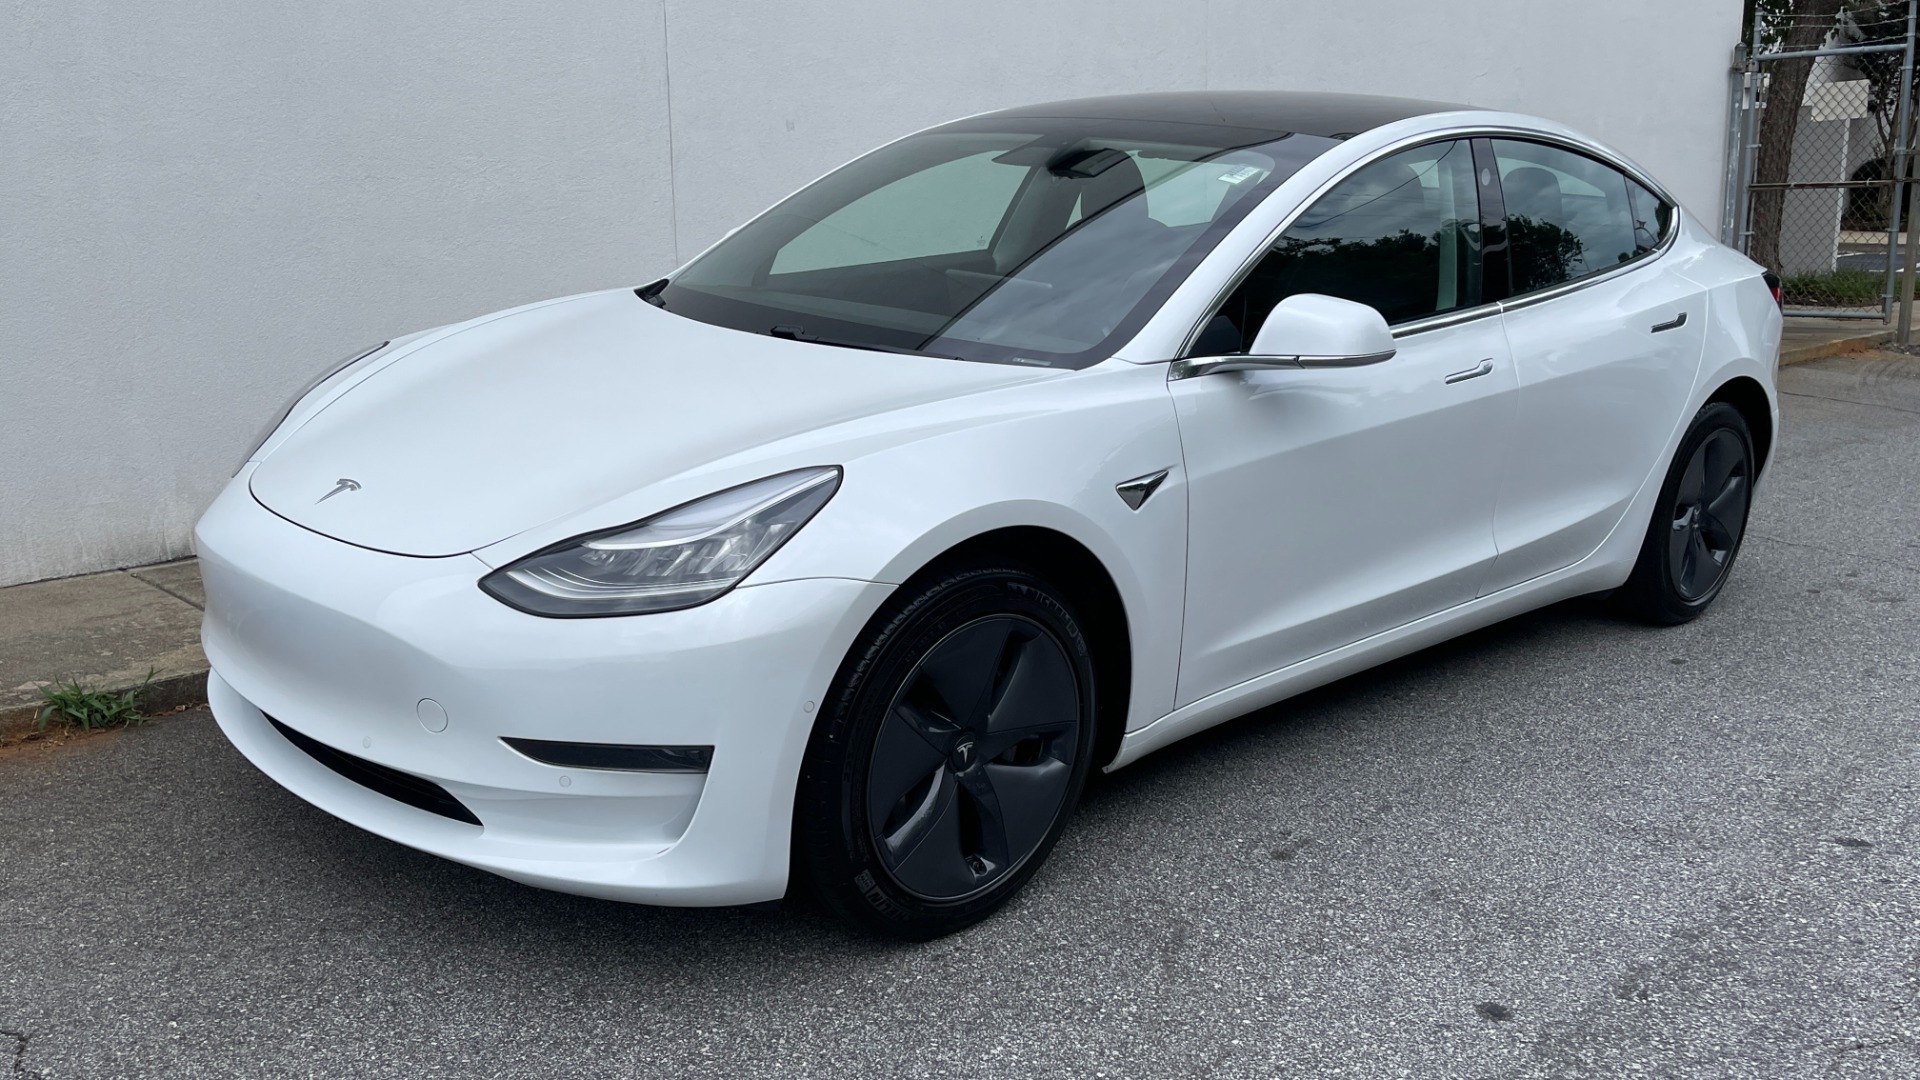 Used 2020 Tesla Model 3 STANDARD RANGE PLUS / AUTOPILOT / STANDARD CONNECTIVITY / PEARL WHITE for sale $46,995 at Formula Imports in Charlotte NC 28227 5